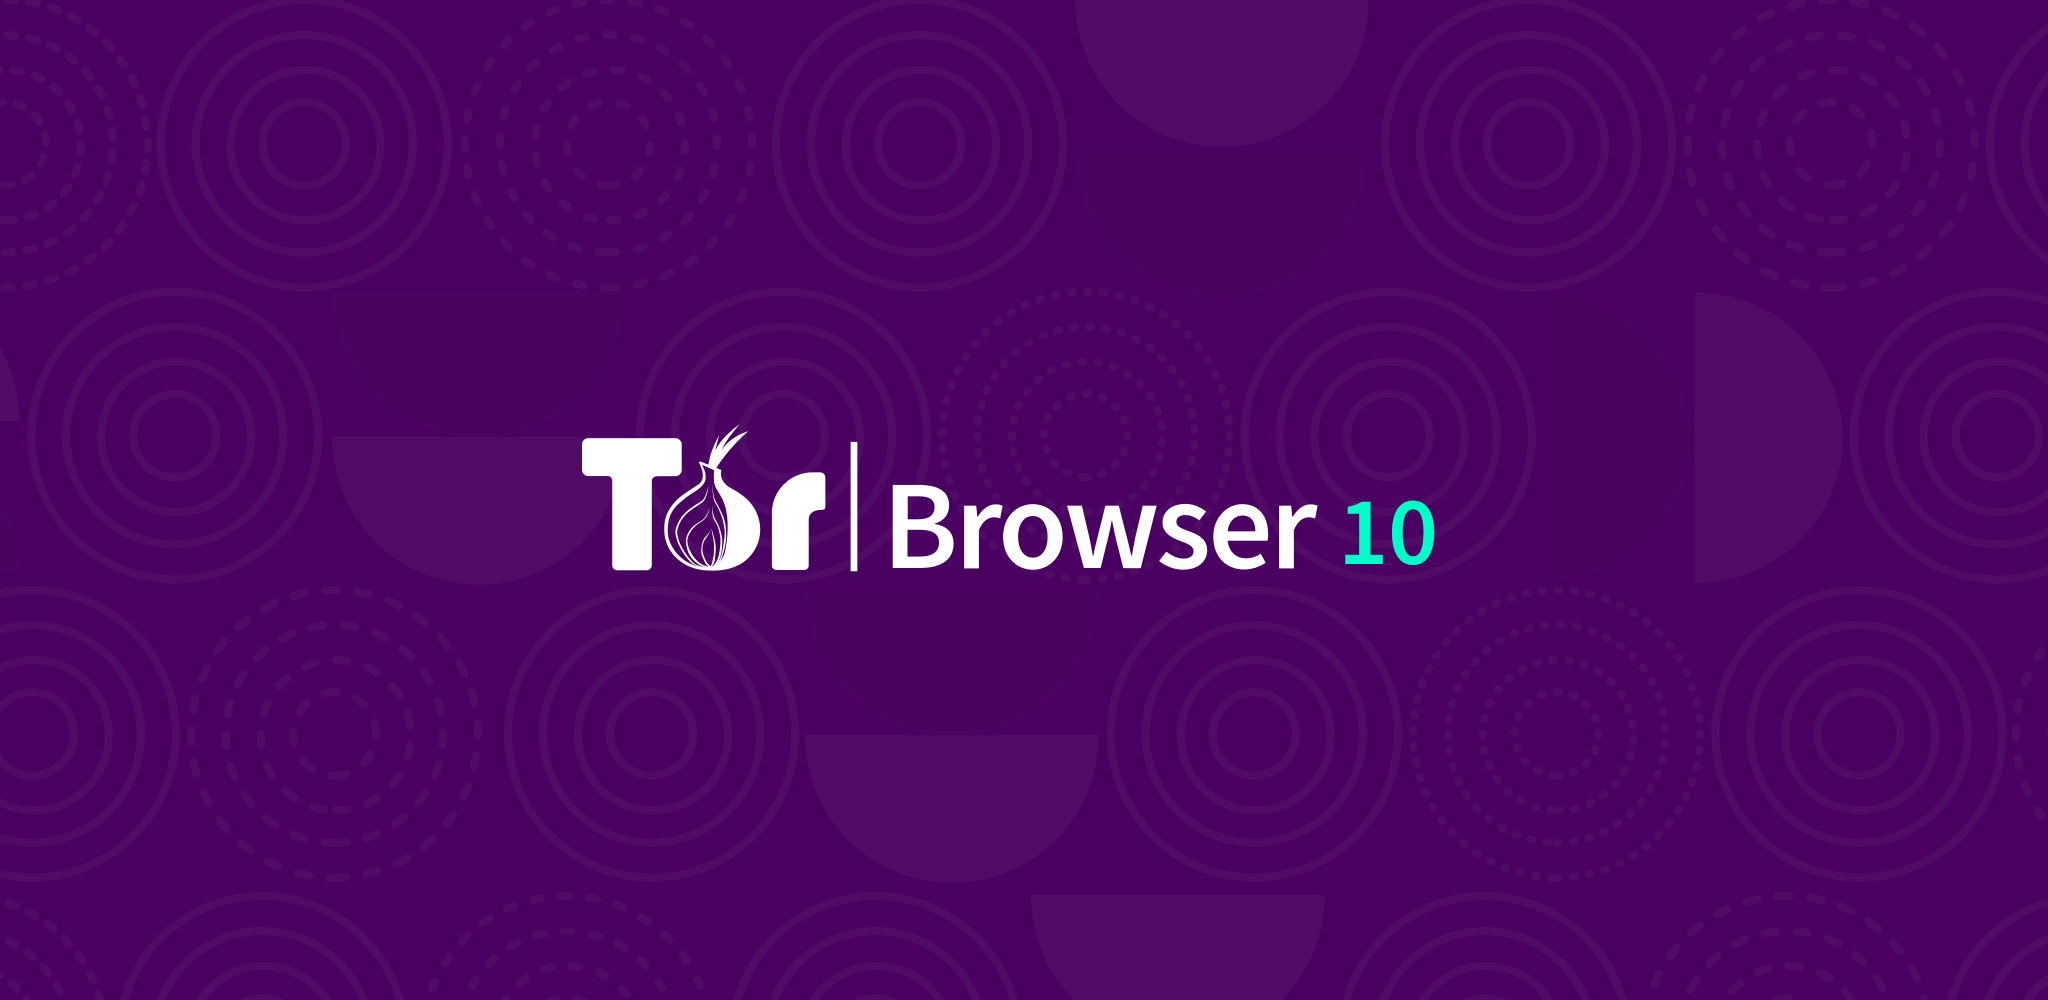 Tor browser pages megaruzxpnew4af tor browser in mac мега